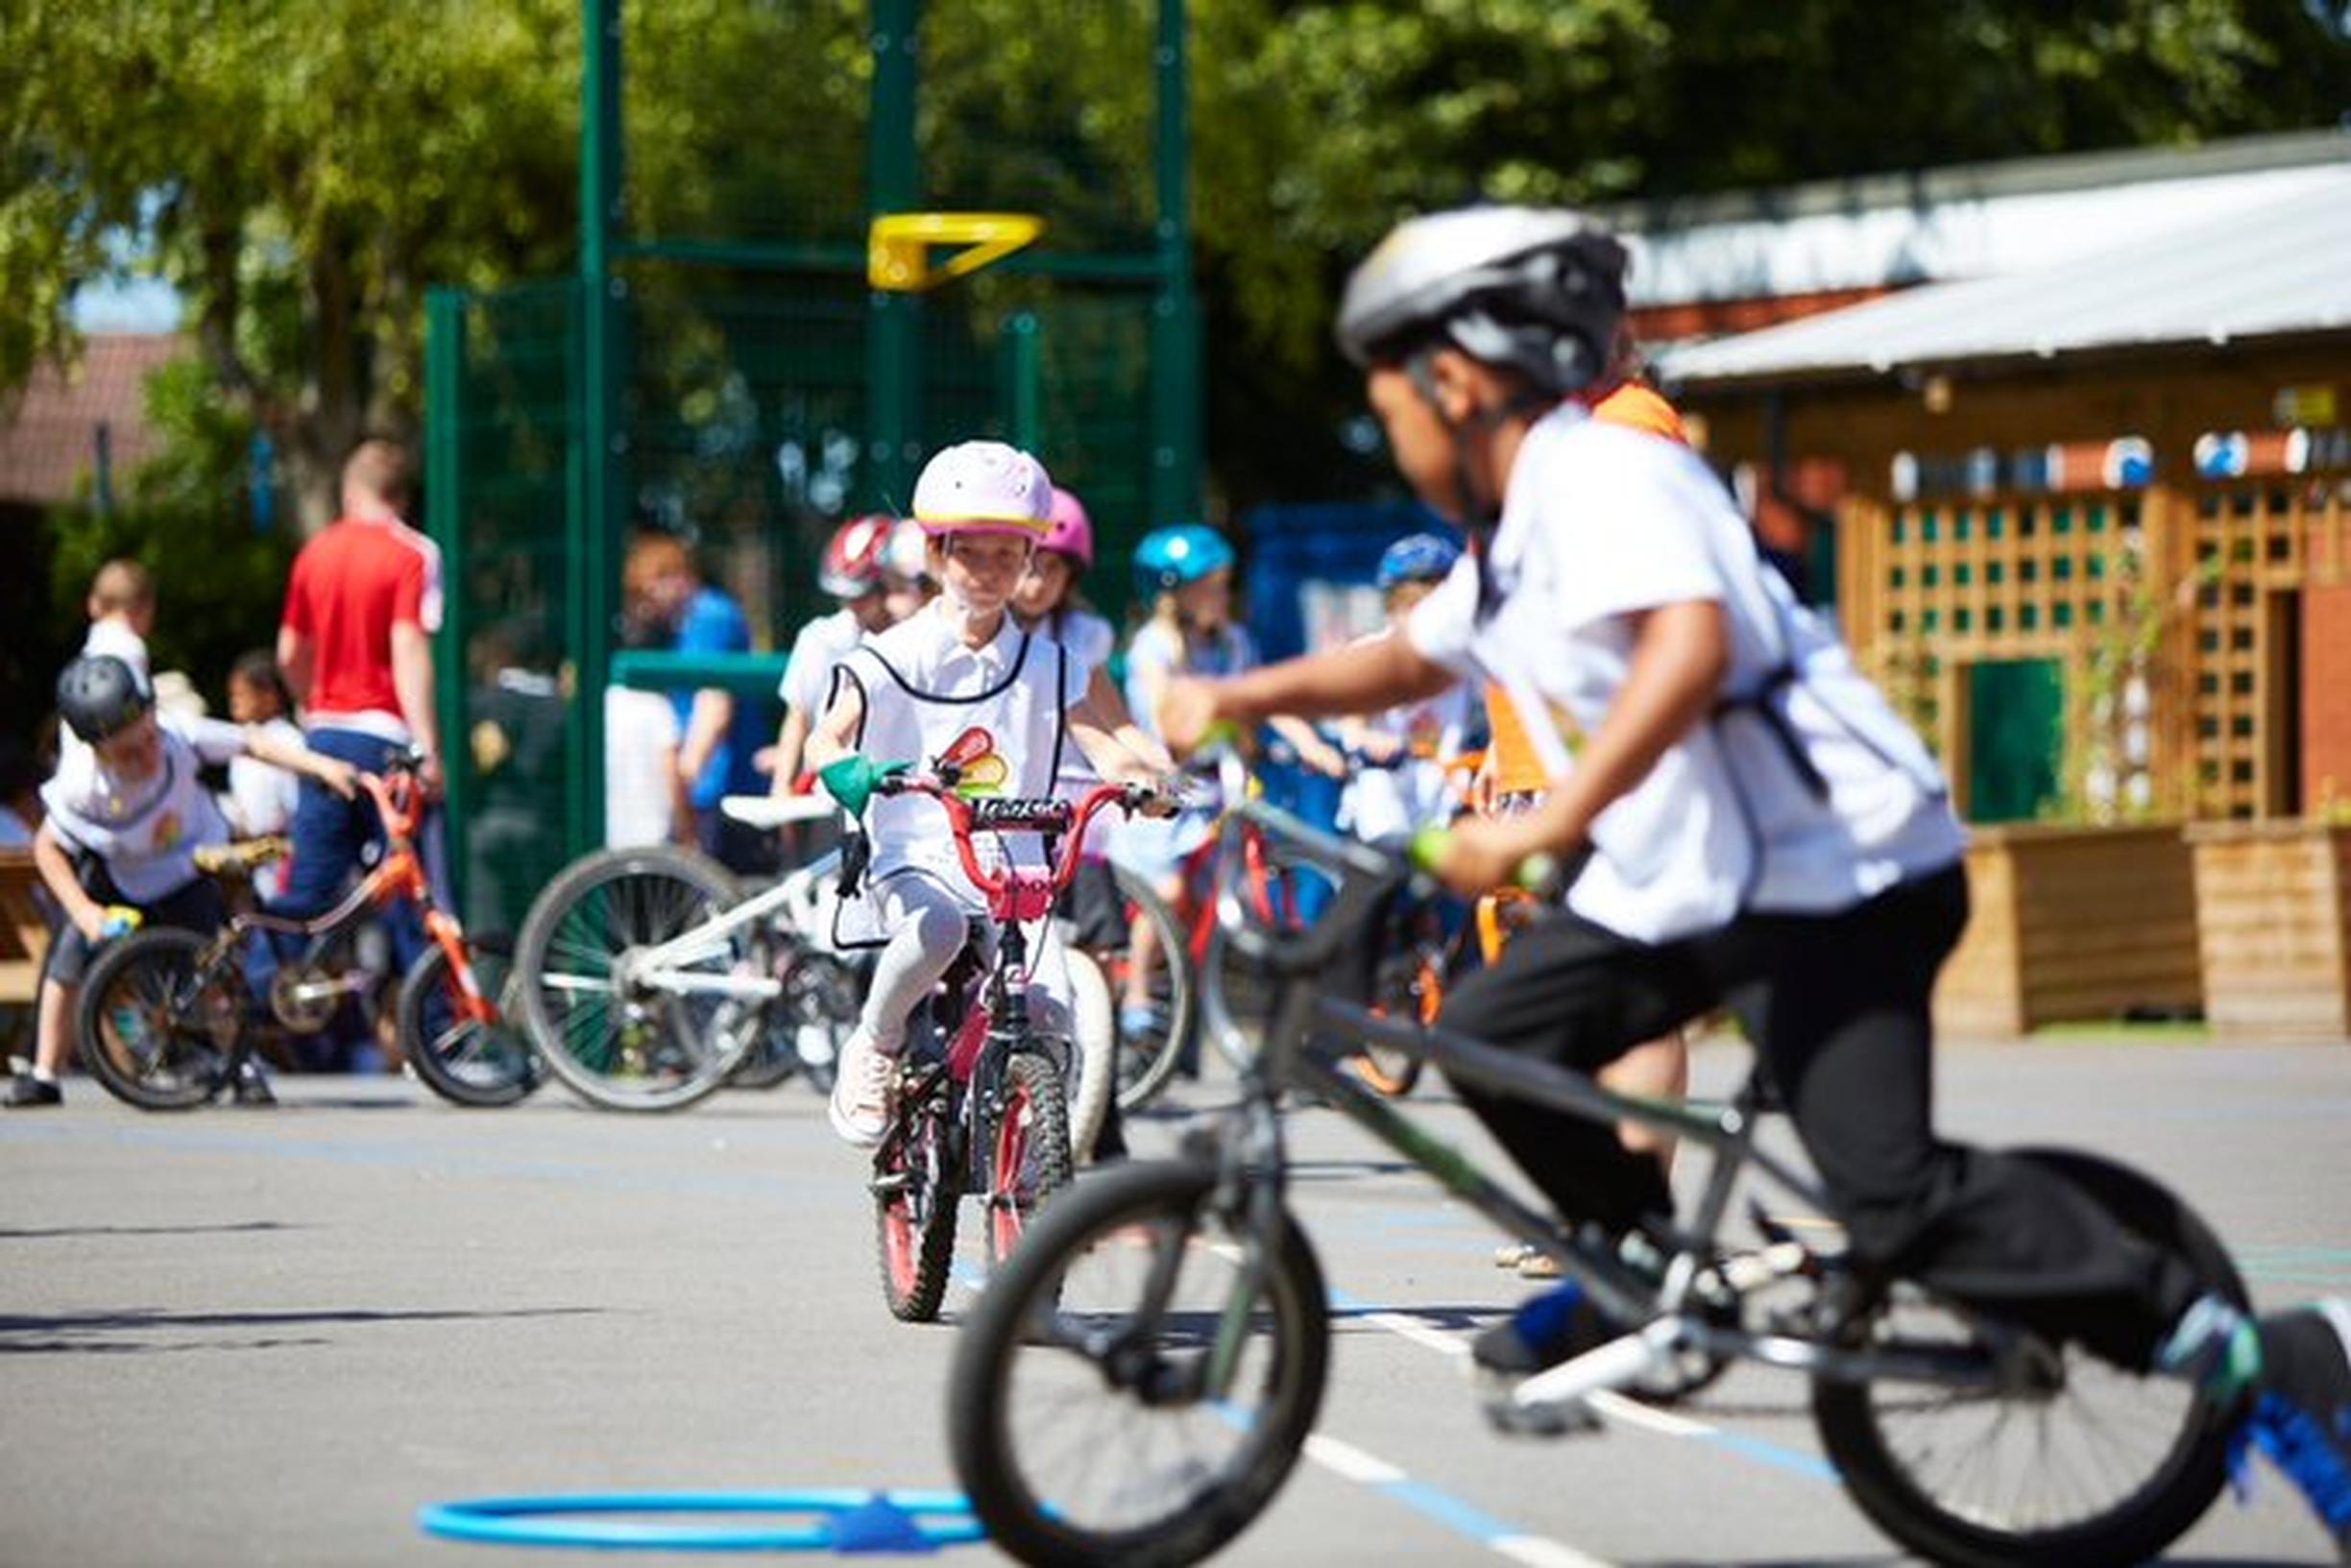 Bikeability classes have resumed